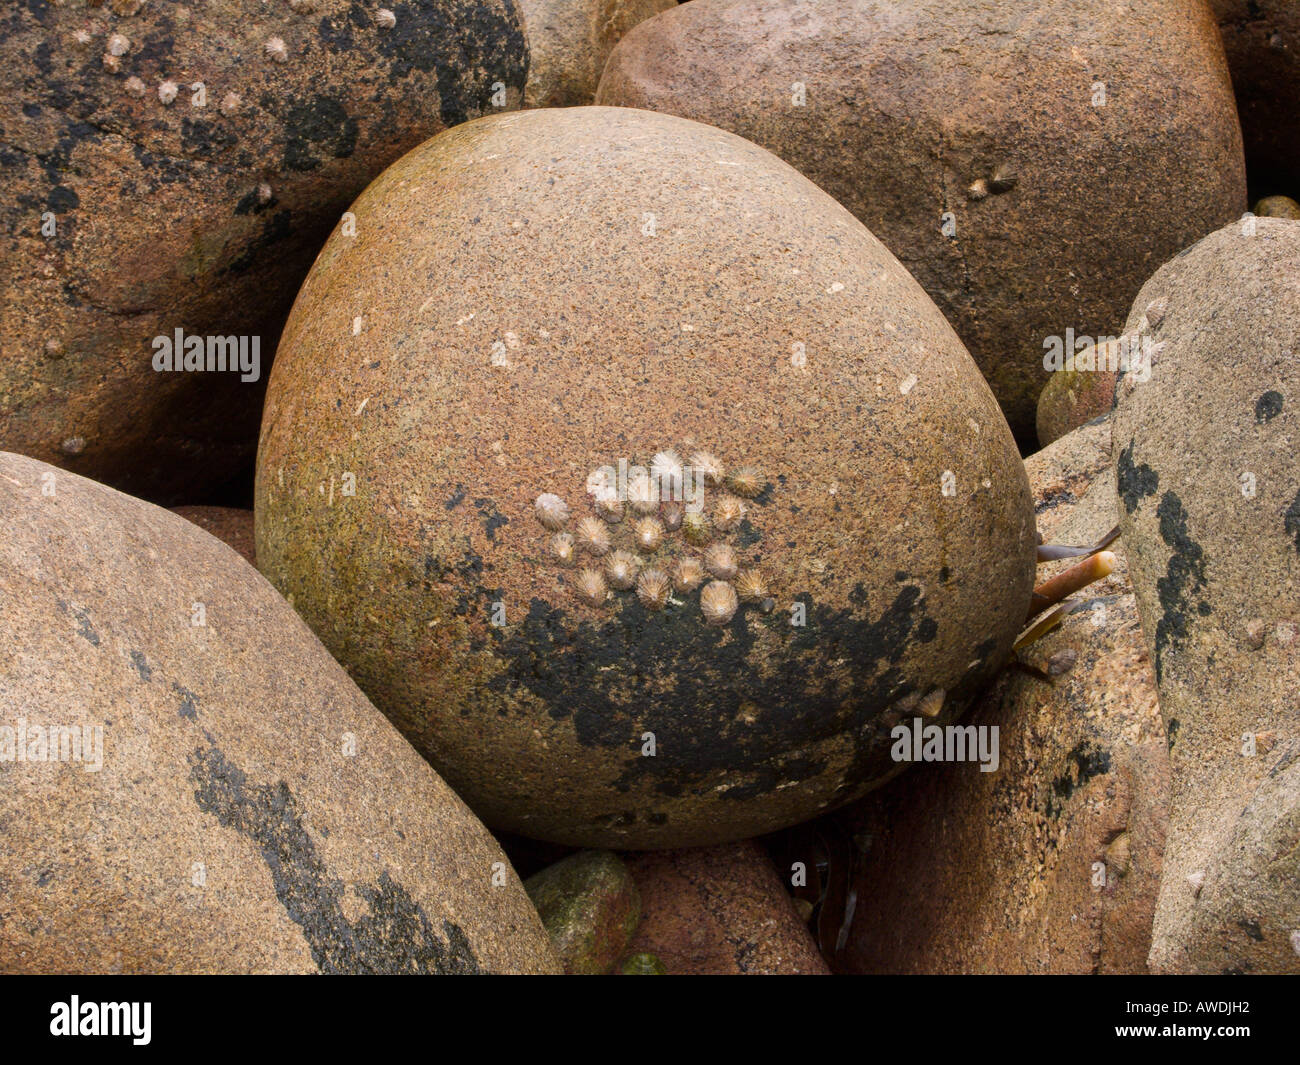 Barnacles growing on a boulder Stock Photo